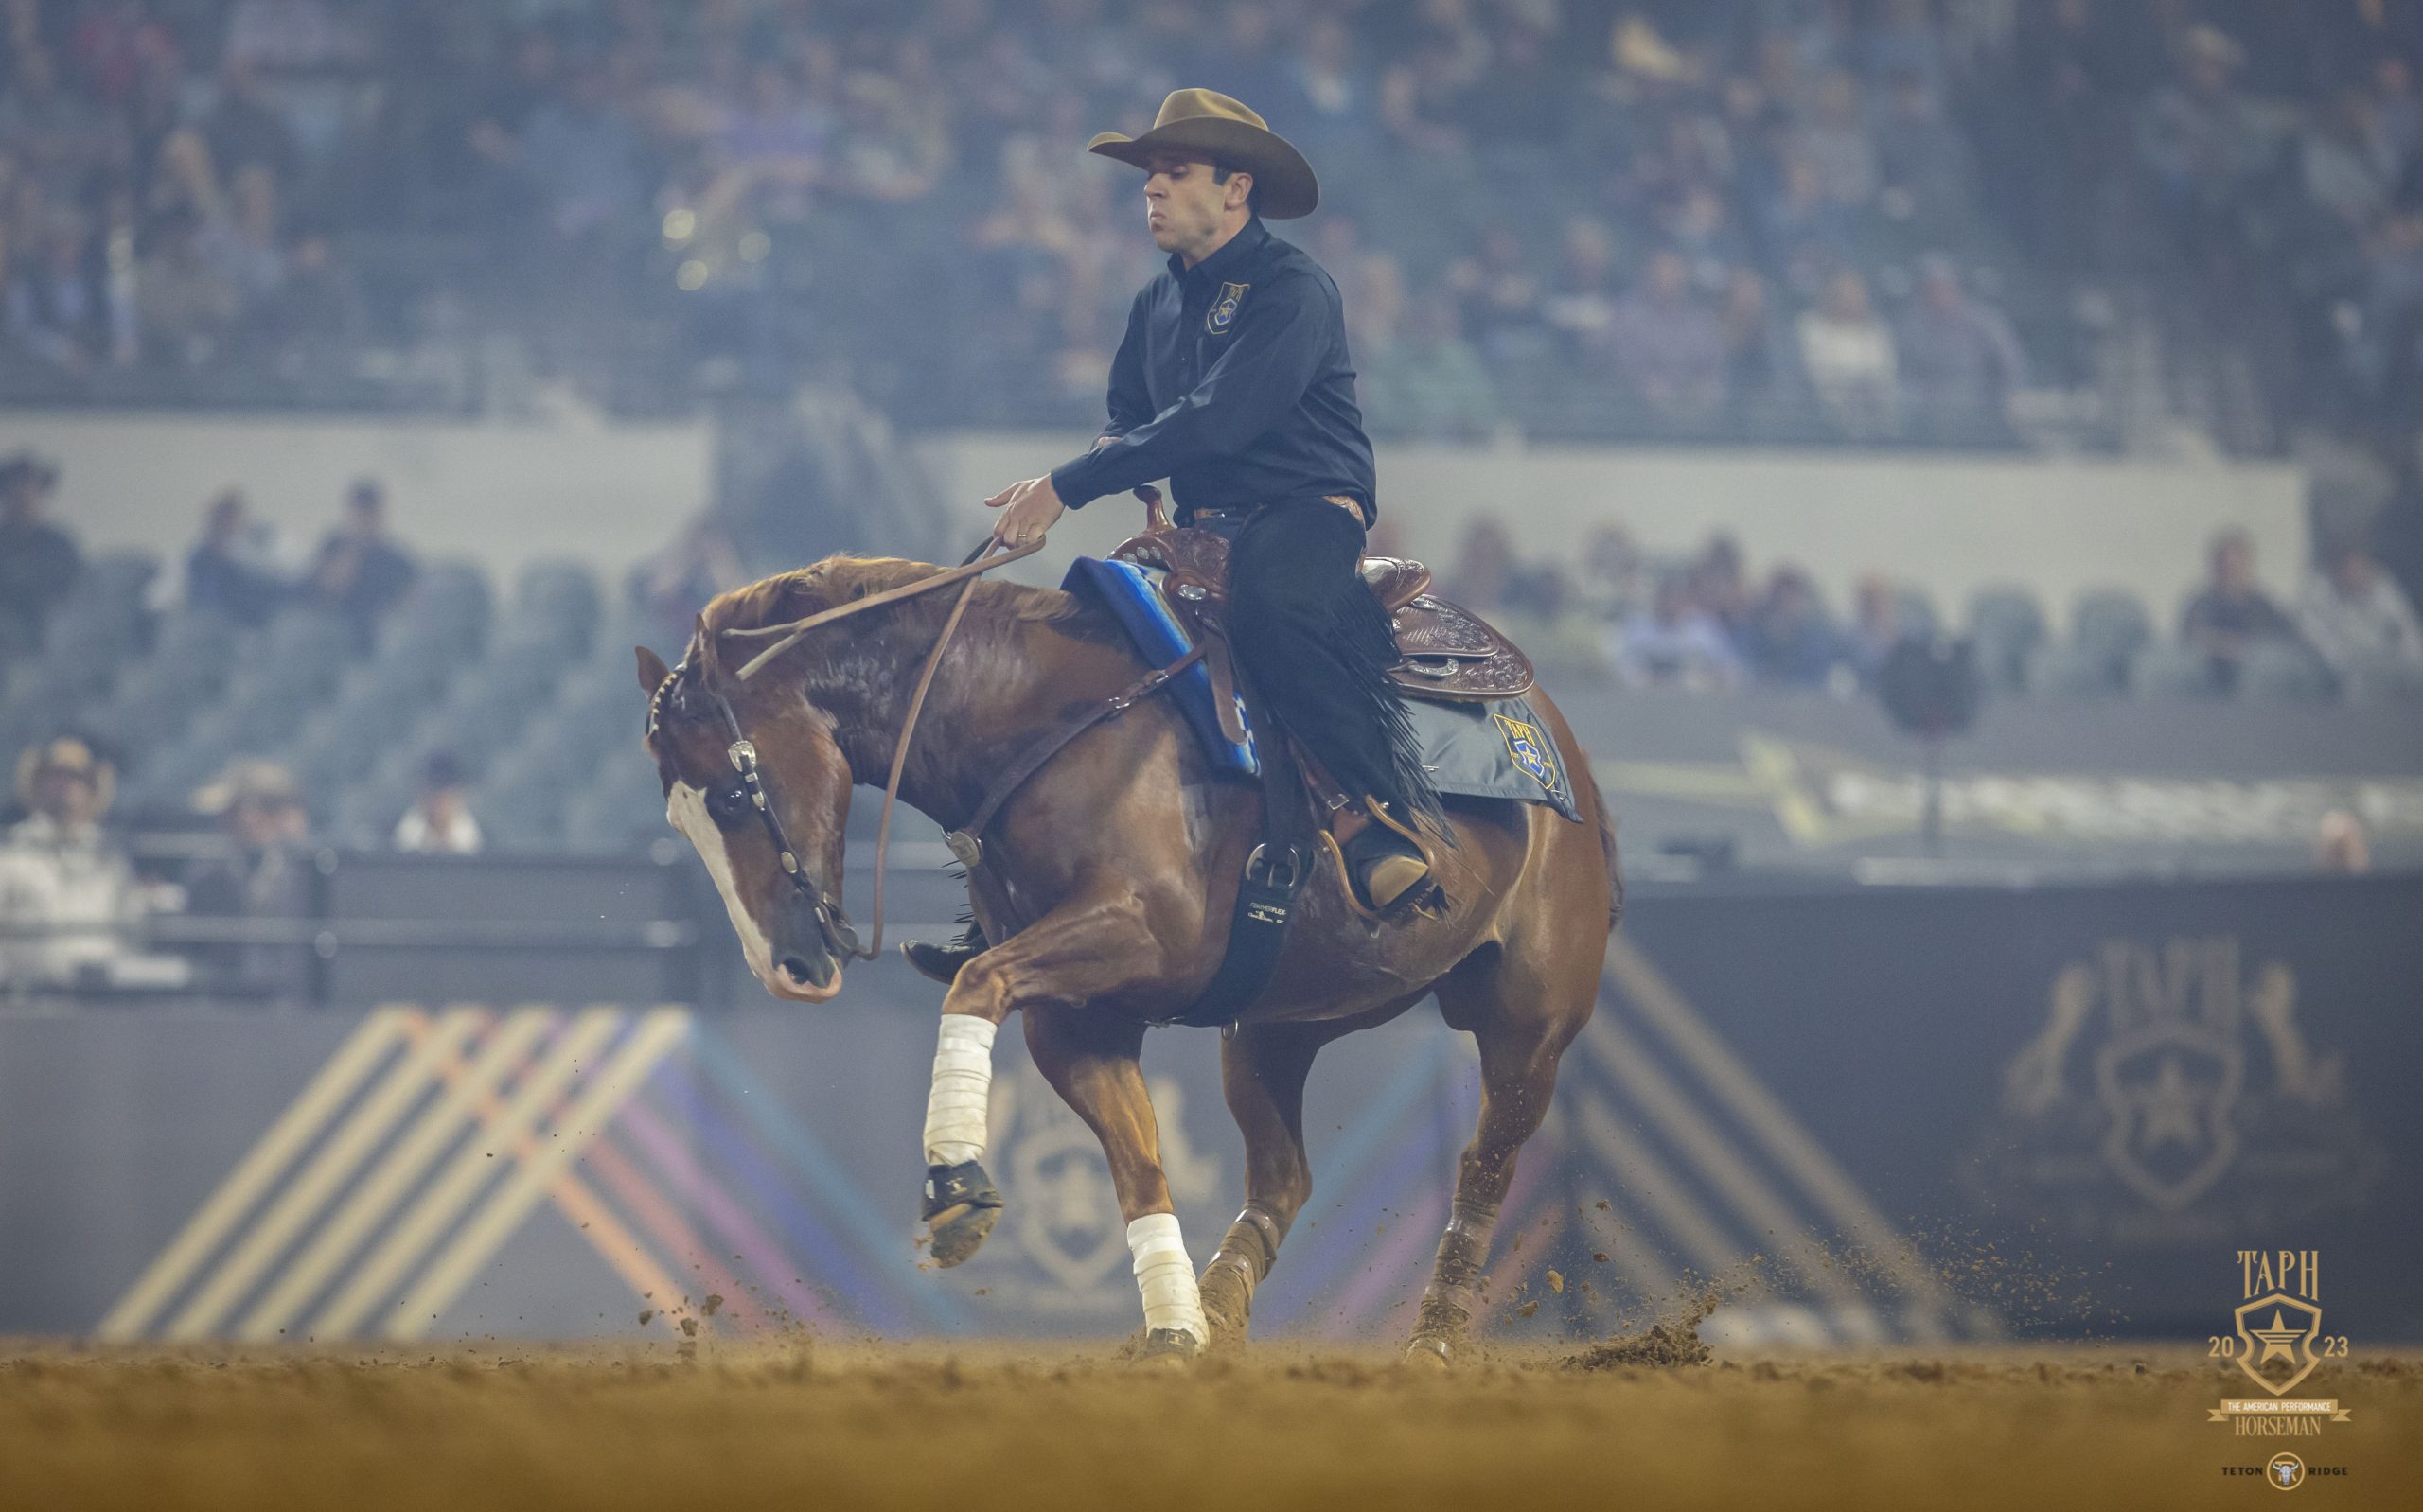 Fernando Salgado competes in a reining competition during the 2023 American Performance Horseman competition.